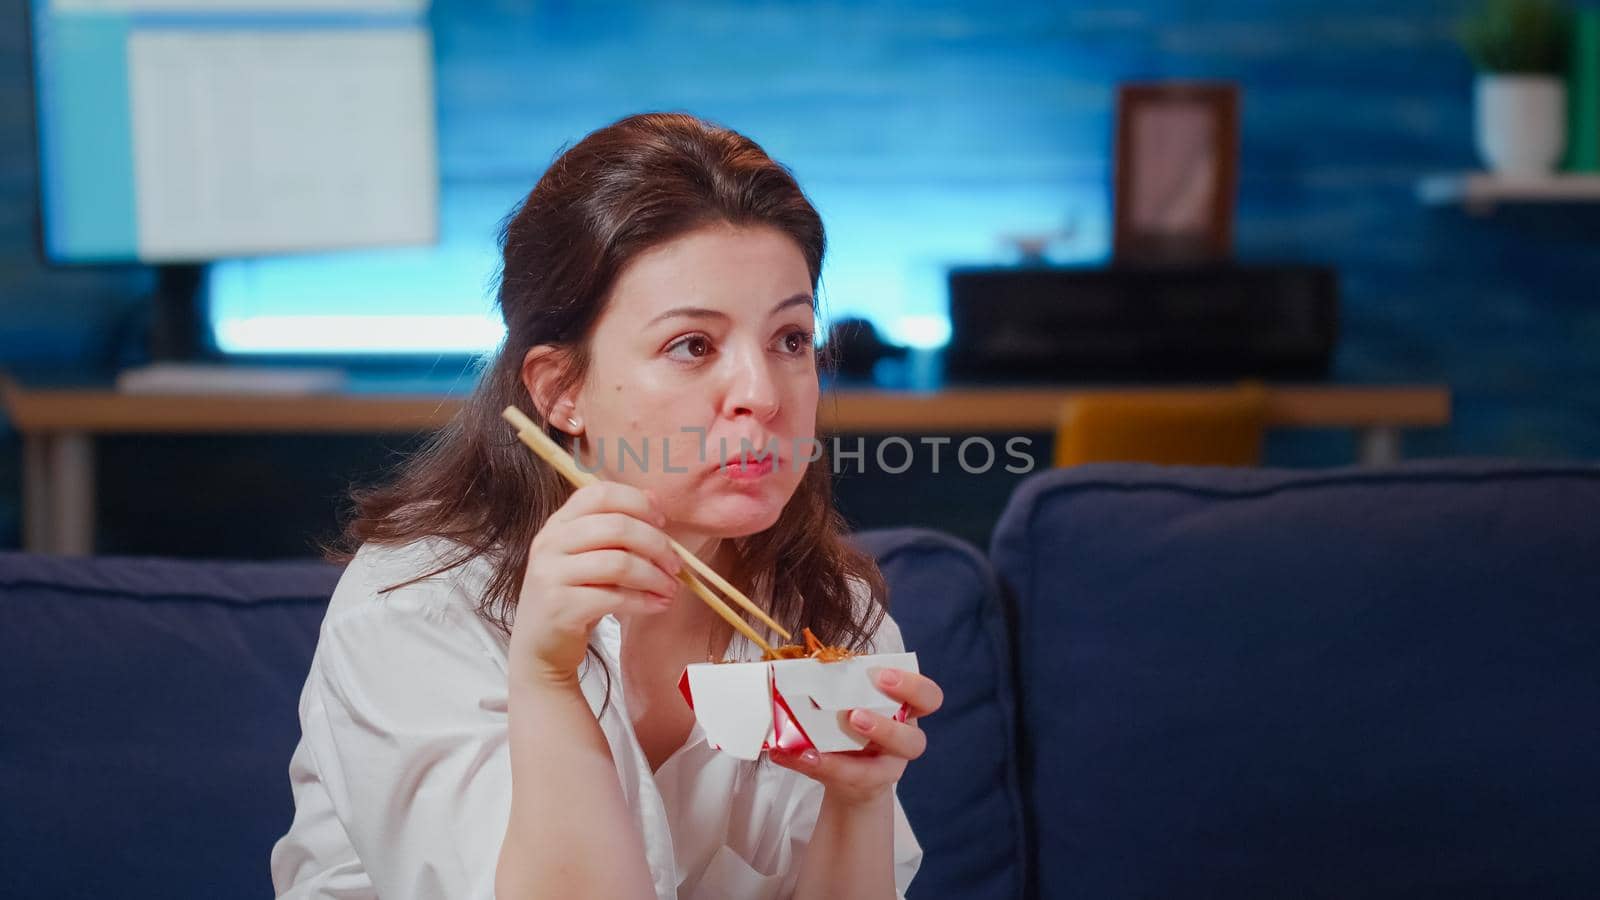 Close up of business woman eating asian food at TV after work on couch. Young person using chopsticks for takeout chinese meal with noodles while looking at television in living room